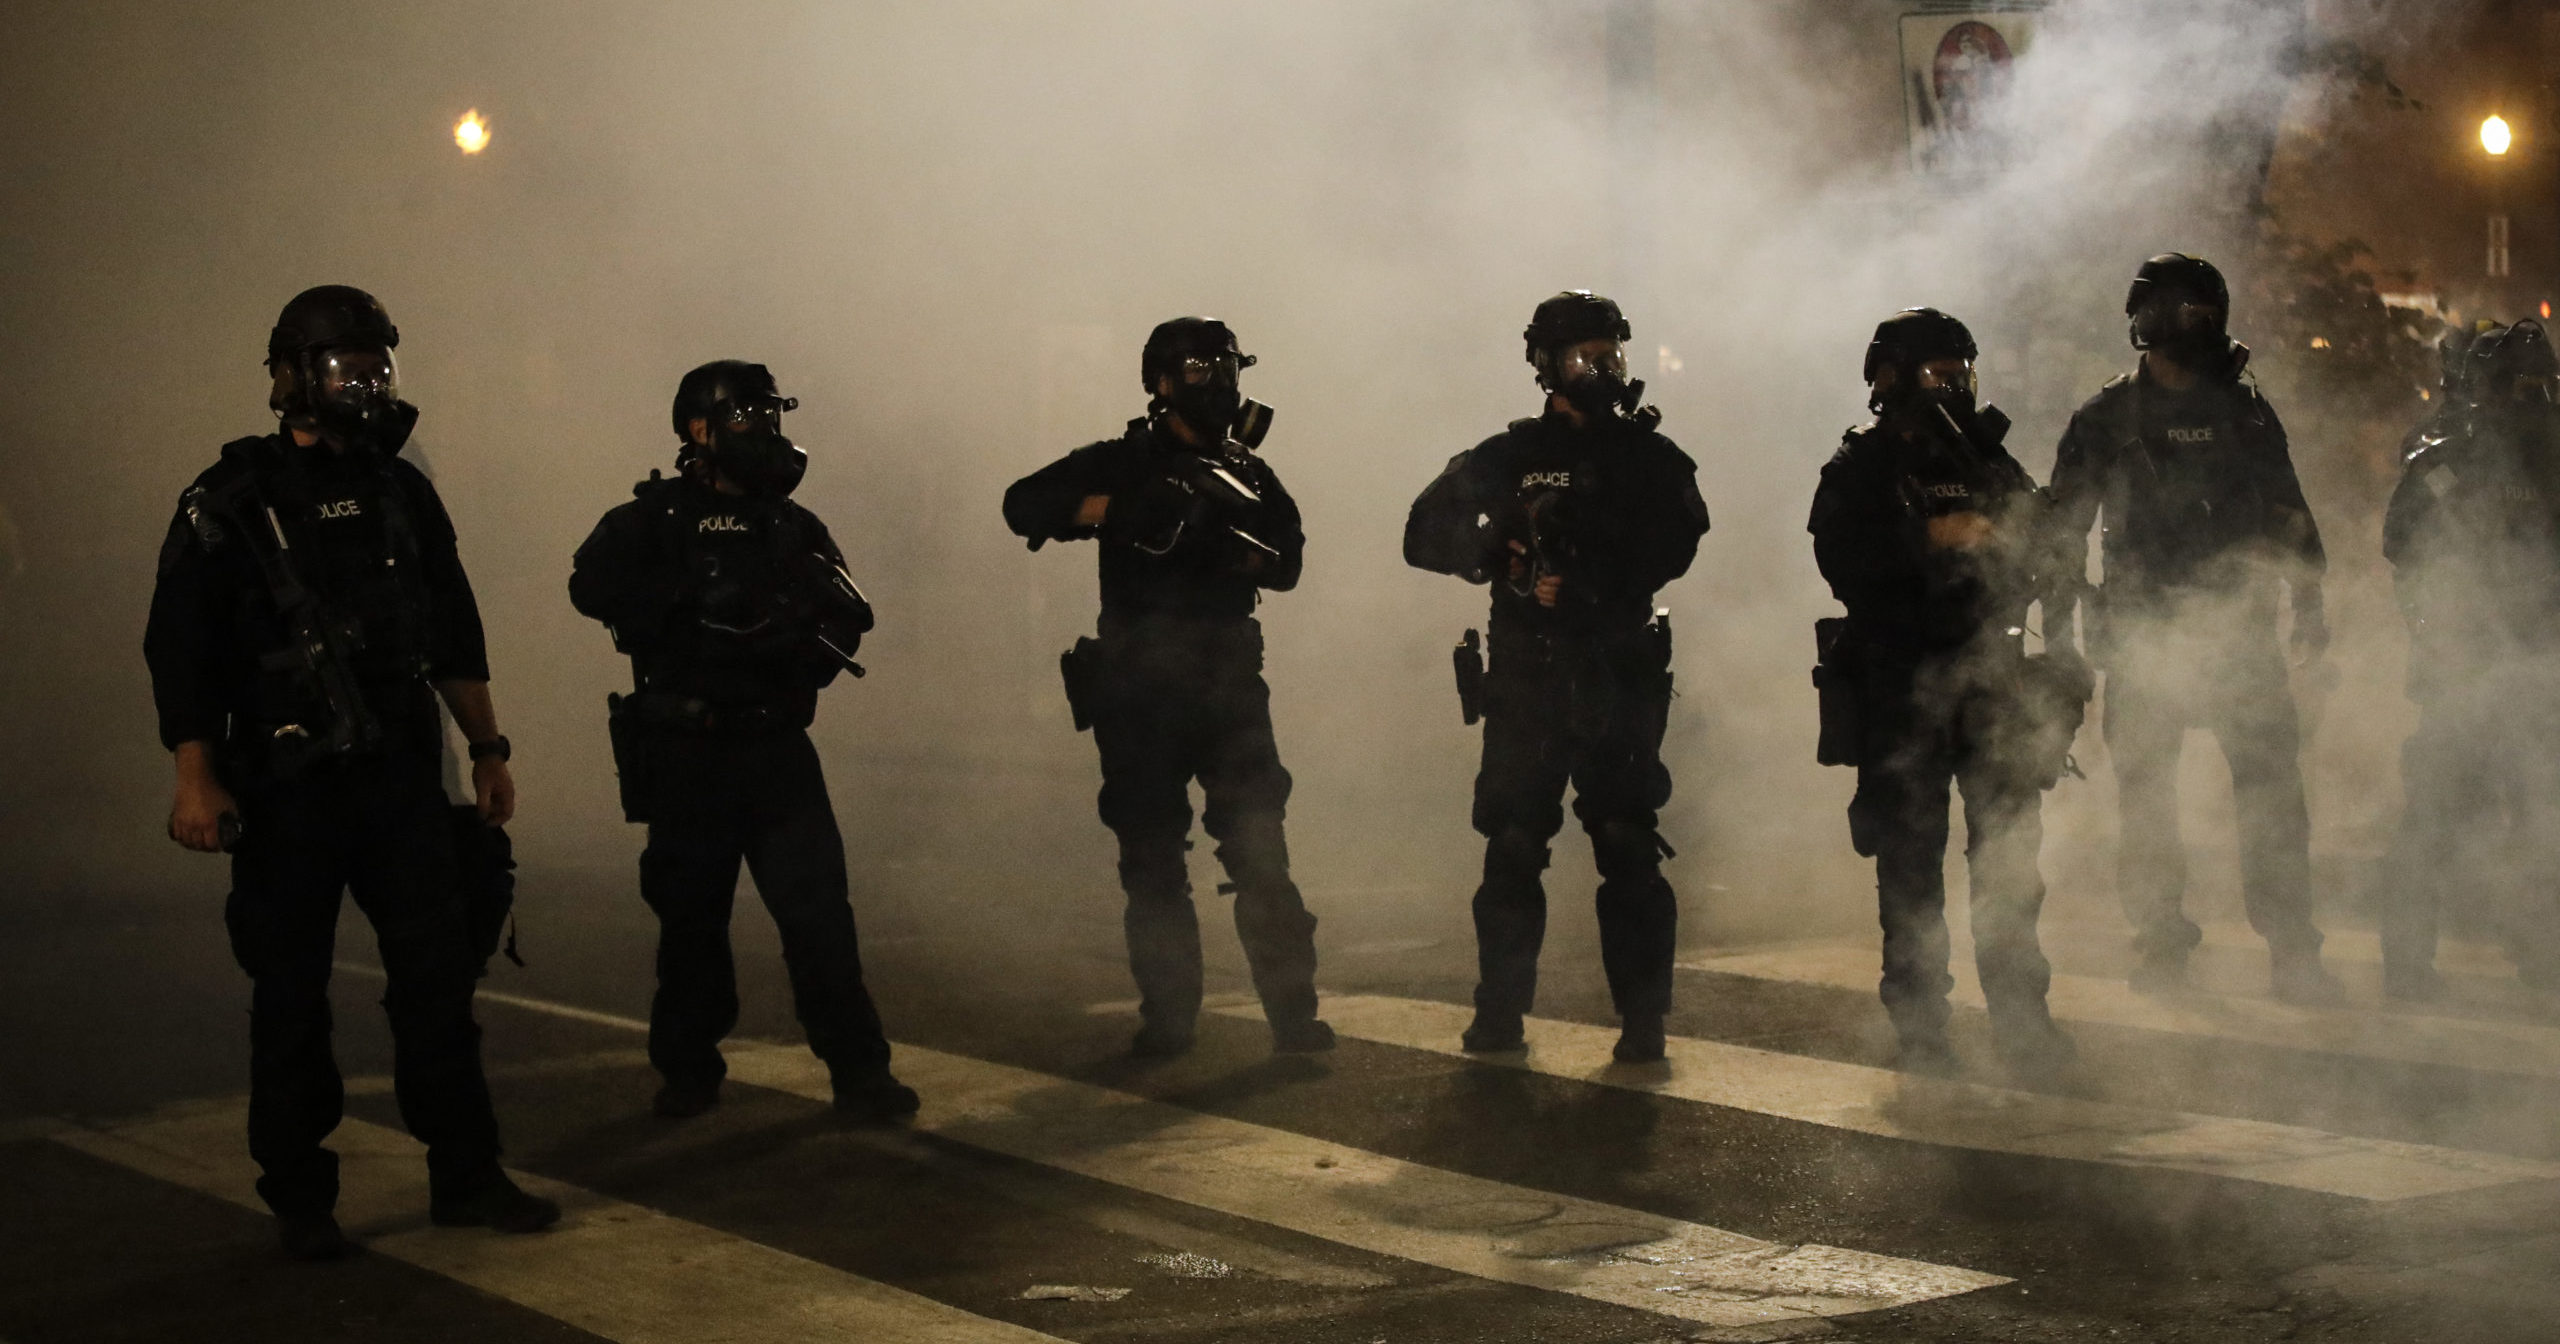 Federal officers are surrounded by smoke as they push back rioters during a Black Lives Matter protest at the Mark O. Hatfield United States Courthouse on July 29, 2020, in Portland, Oregon.